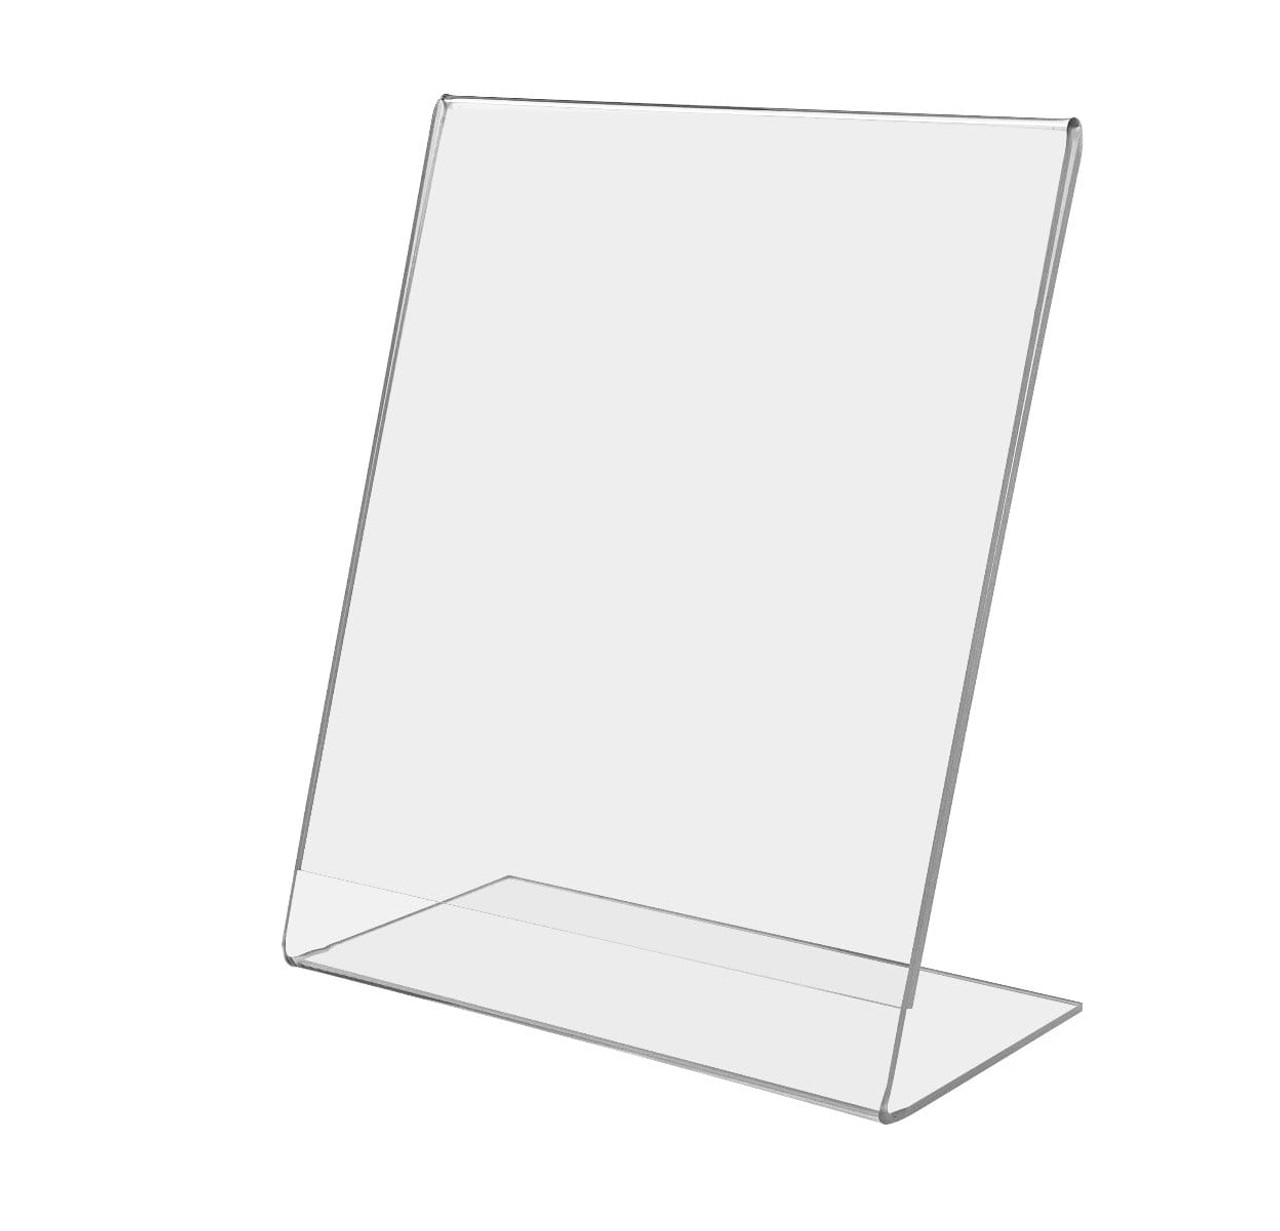 6”W x 8”H Sign Stand Side Load Promotional Frame Display Notice